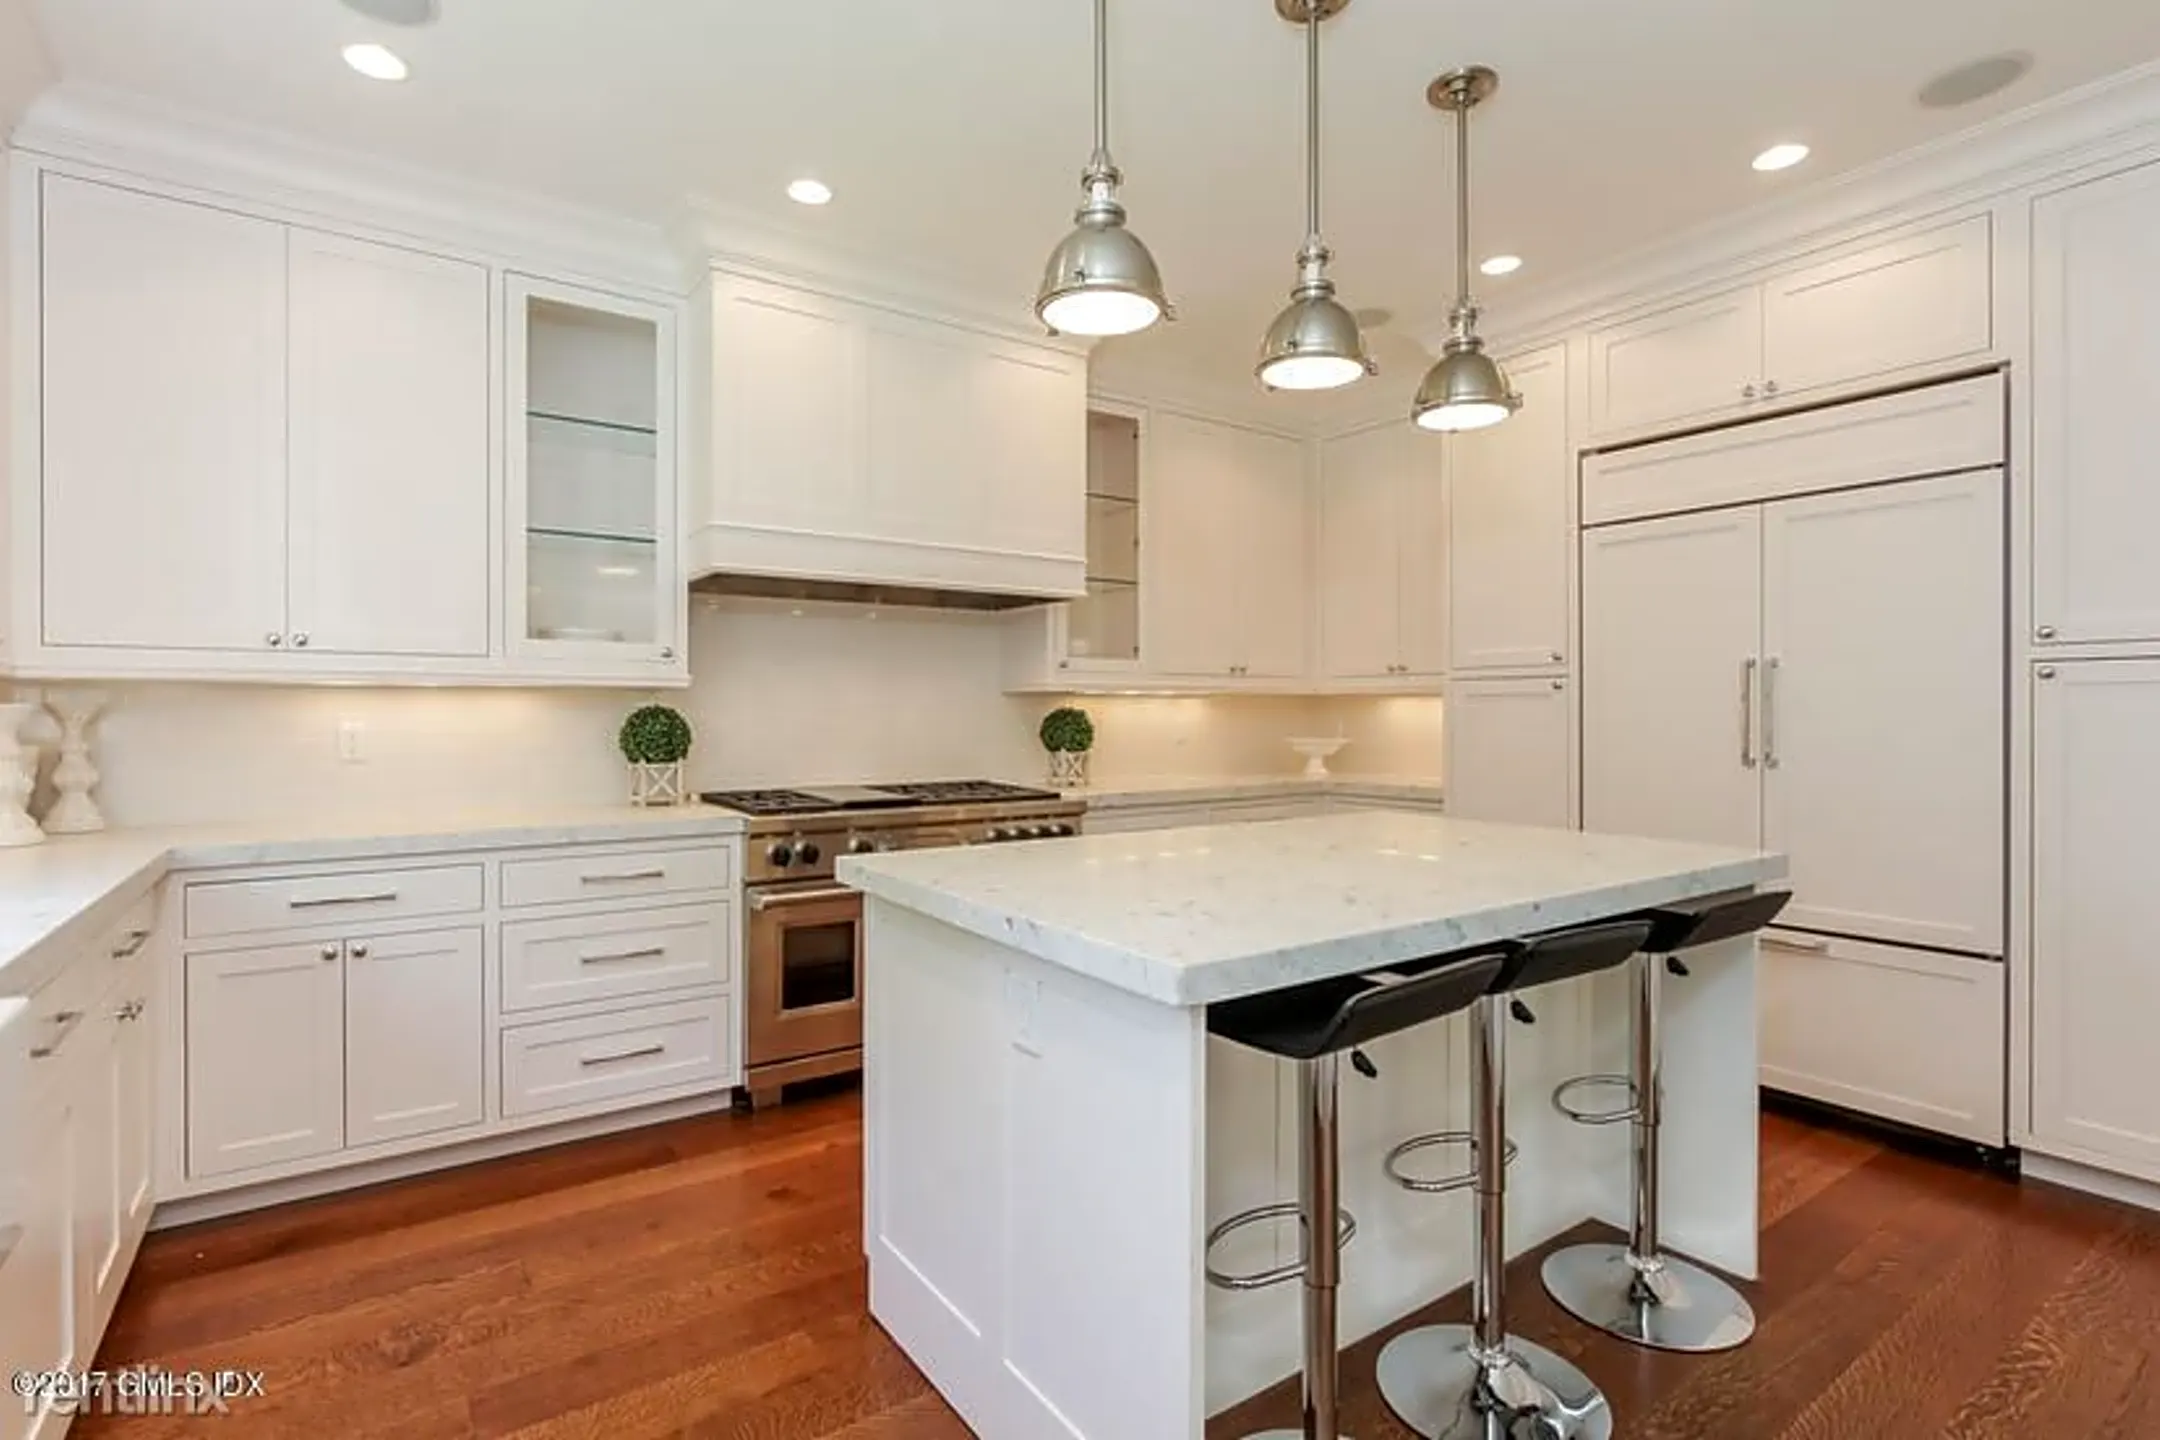 151 Milbank Ave | Greenwich, CT Townhomes for Rent | Rent.